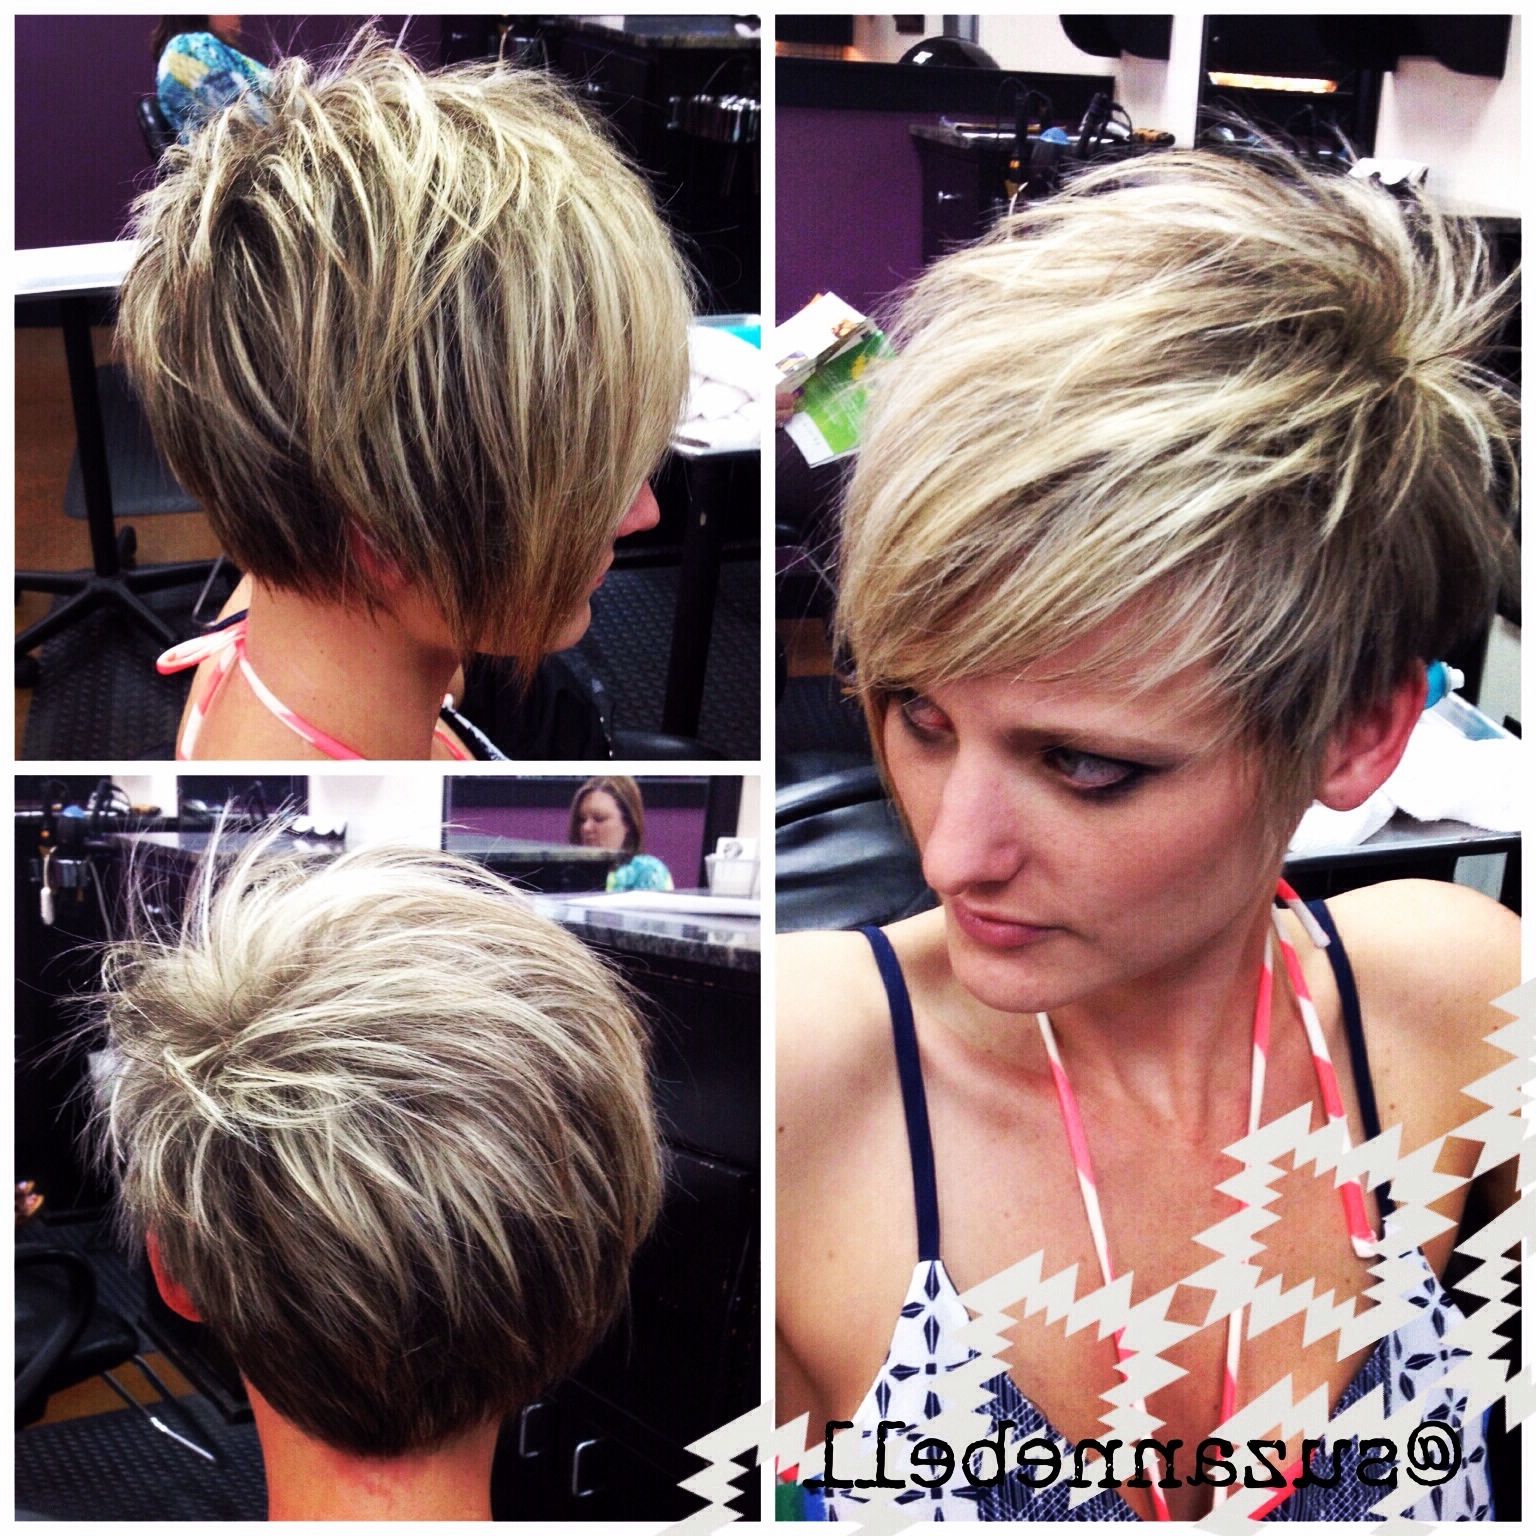 Asymmetrical Pixie | Hair Inspiration | Pinterest | Asymmetrical Within Most Up To Date Short Sassy Pixie Hairstyles (View 9 of 15)